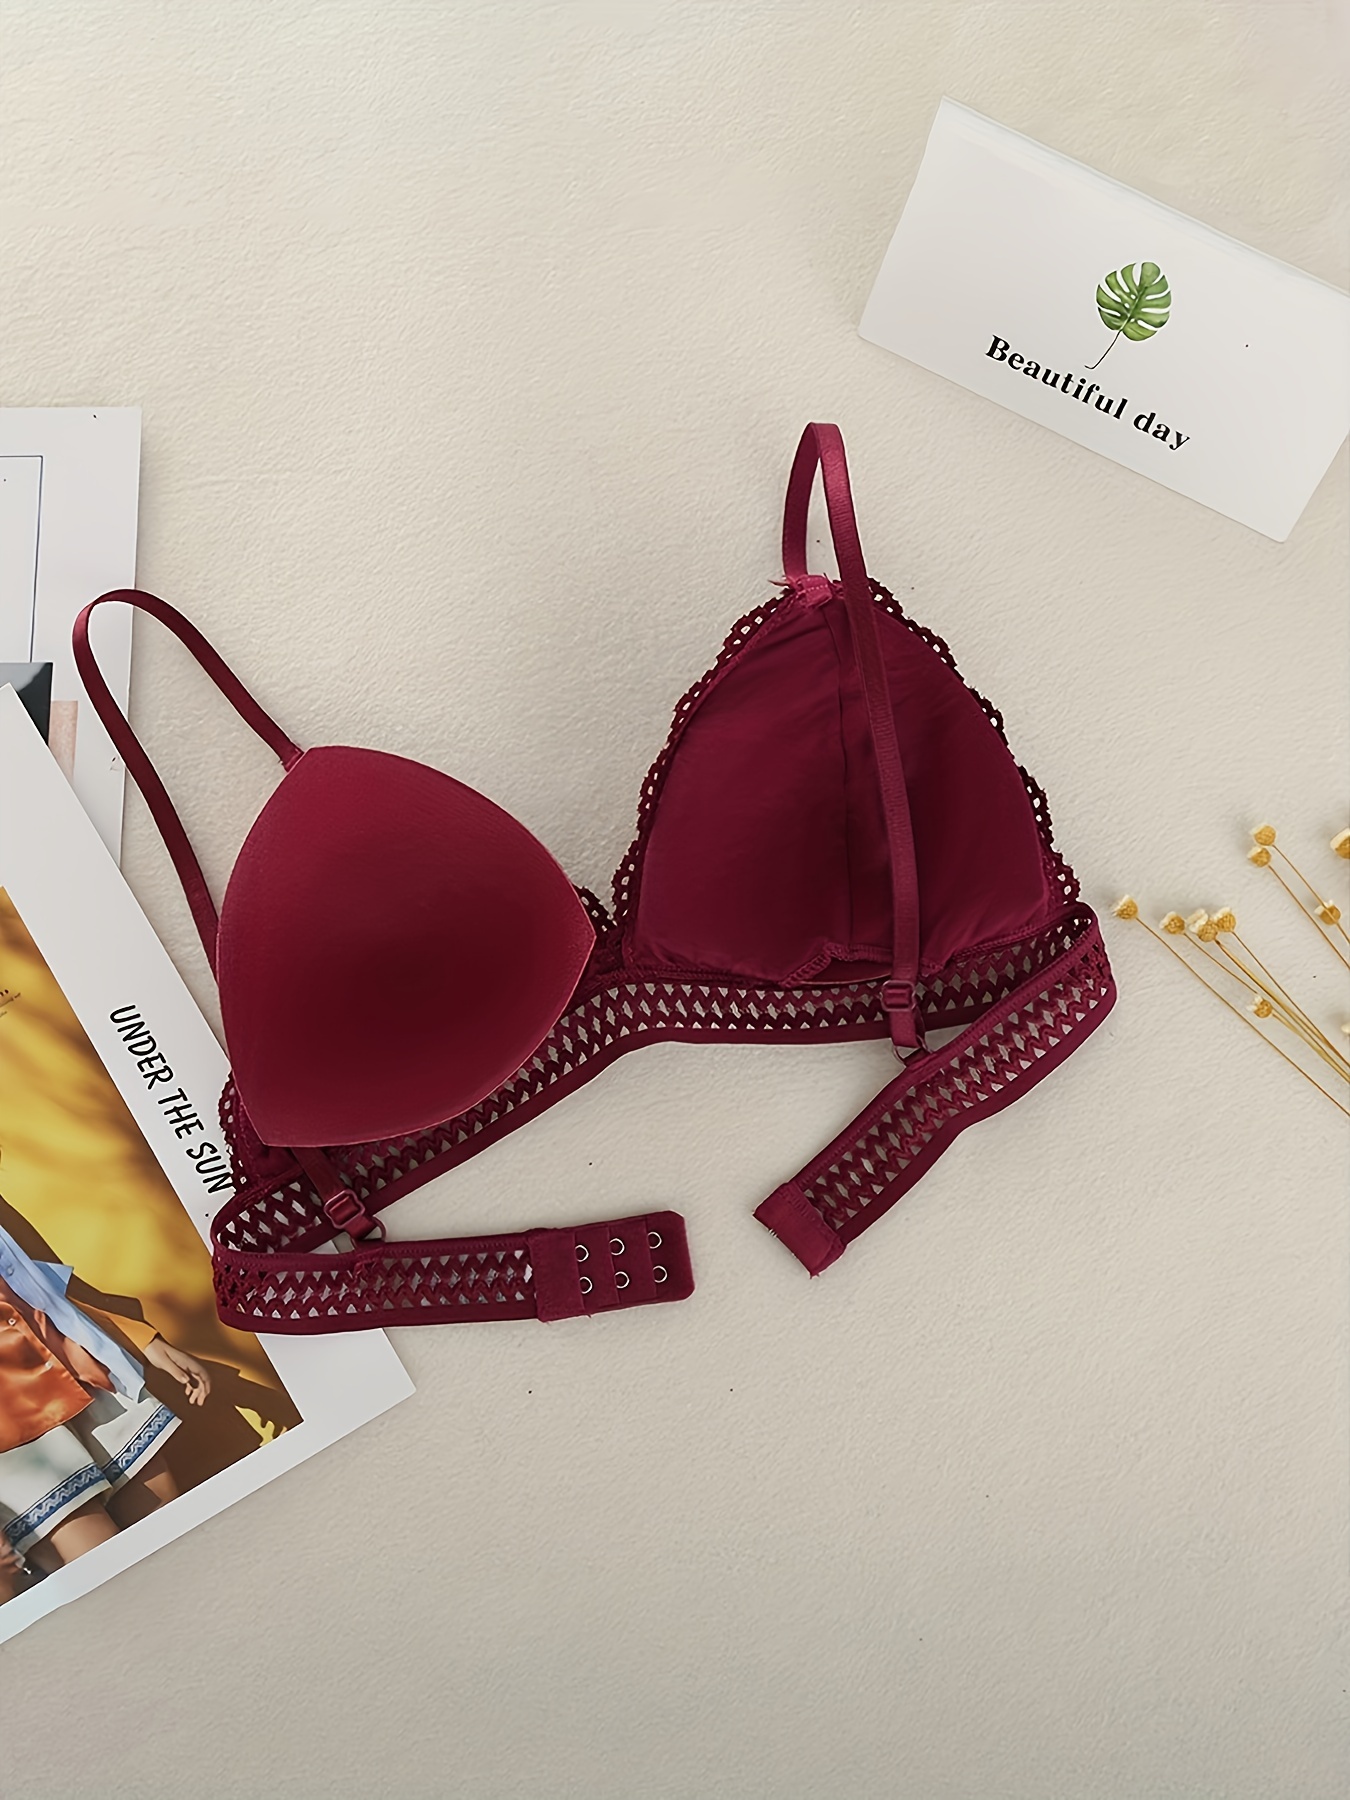 Maroon bra set with lace, Women's Fashion, New Undergarments